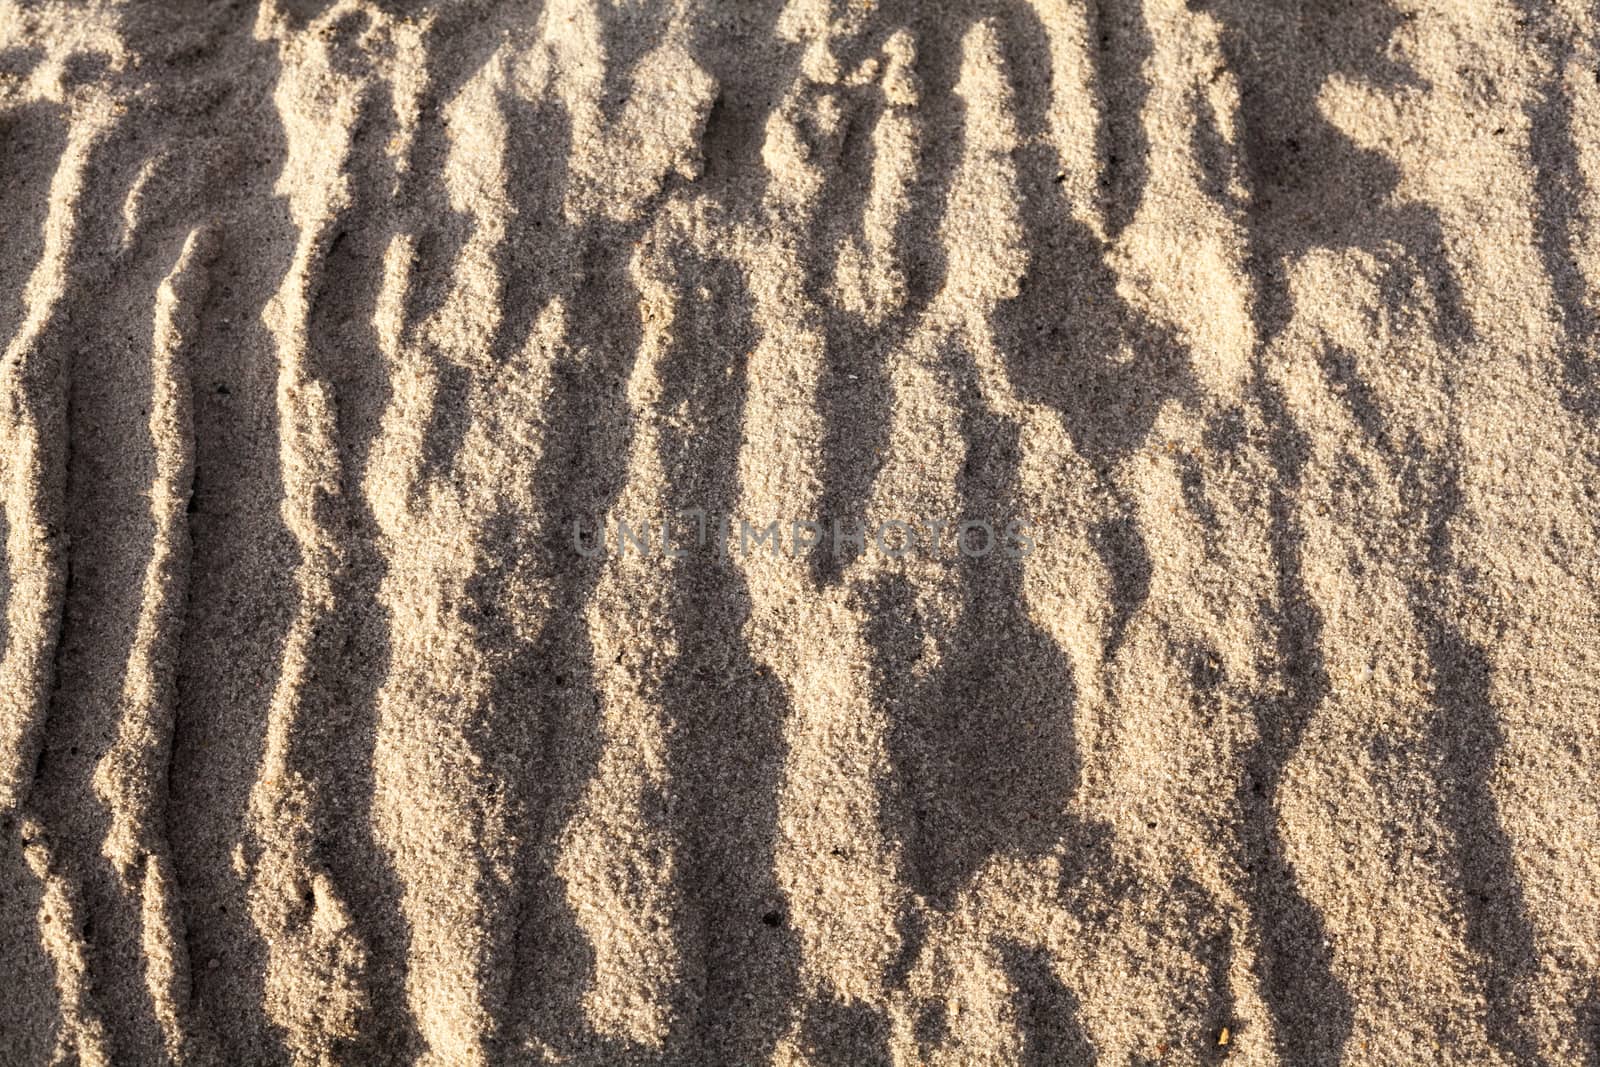 Sand surface after the rain with the visible traces of the water currents